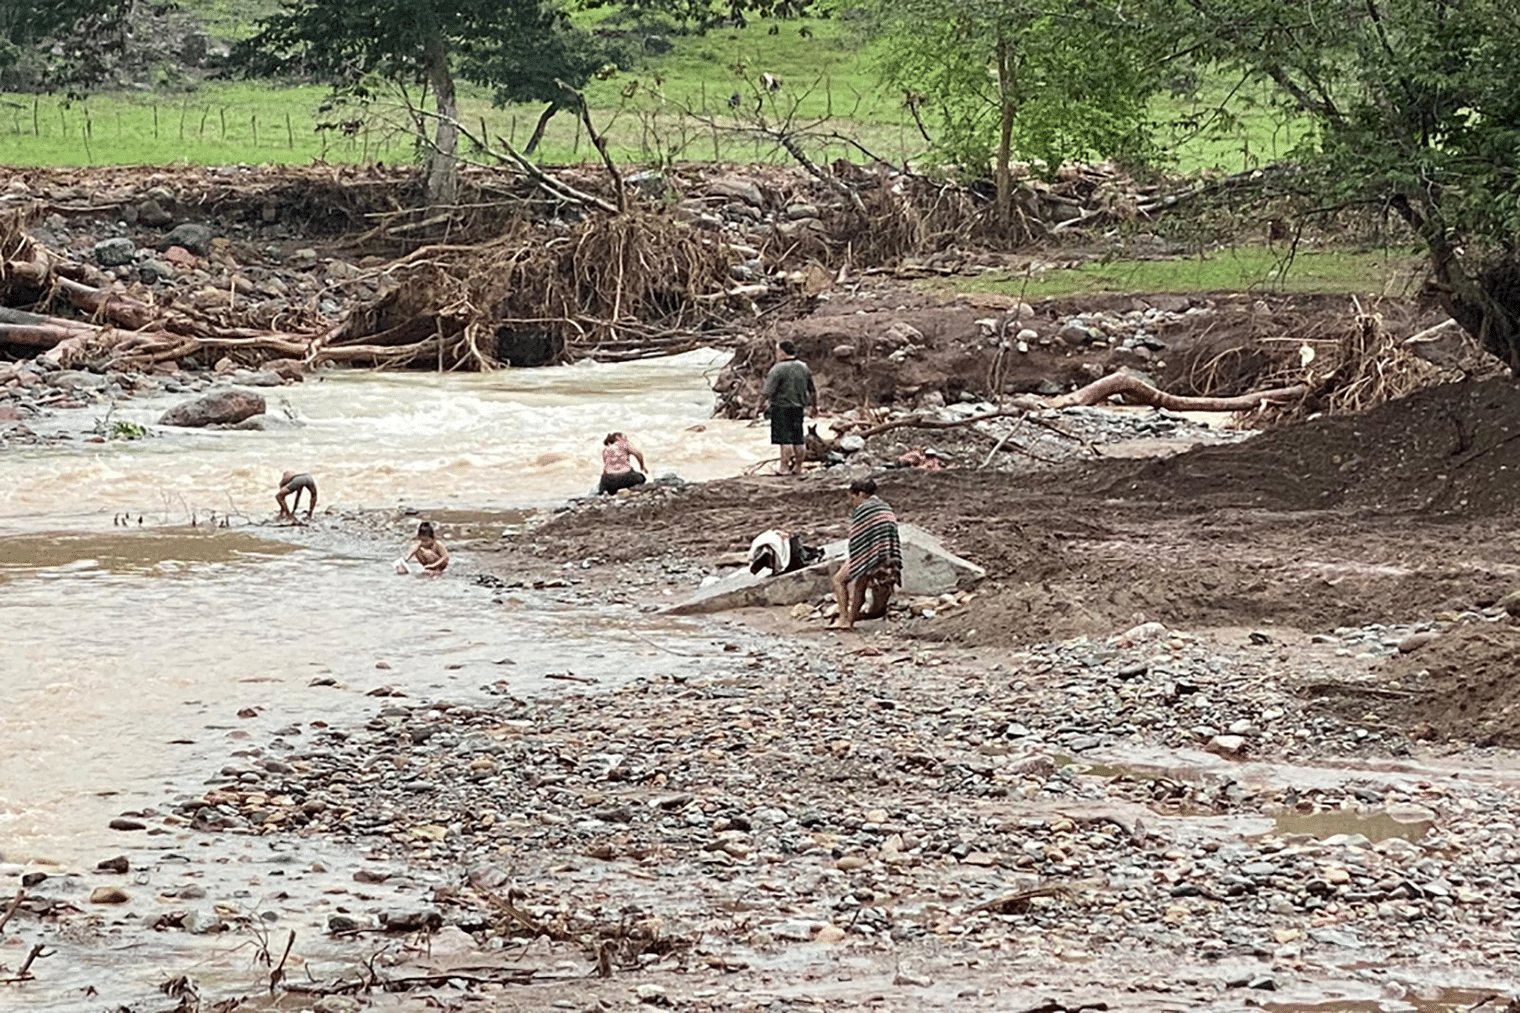 local population bathing in river